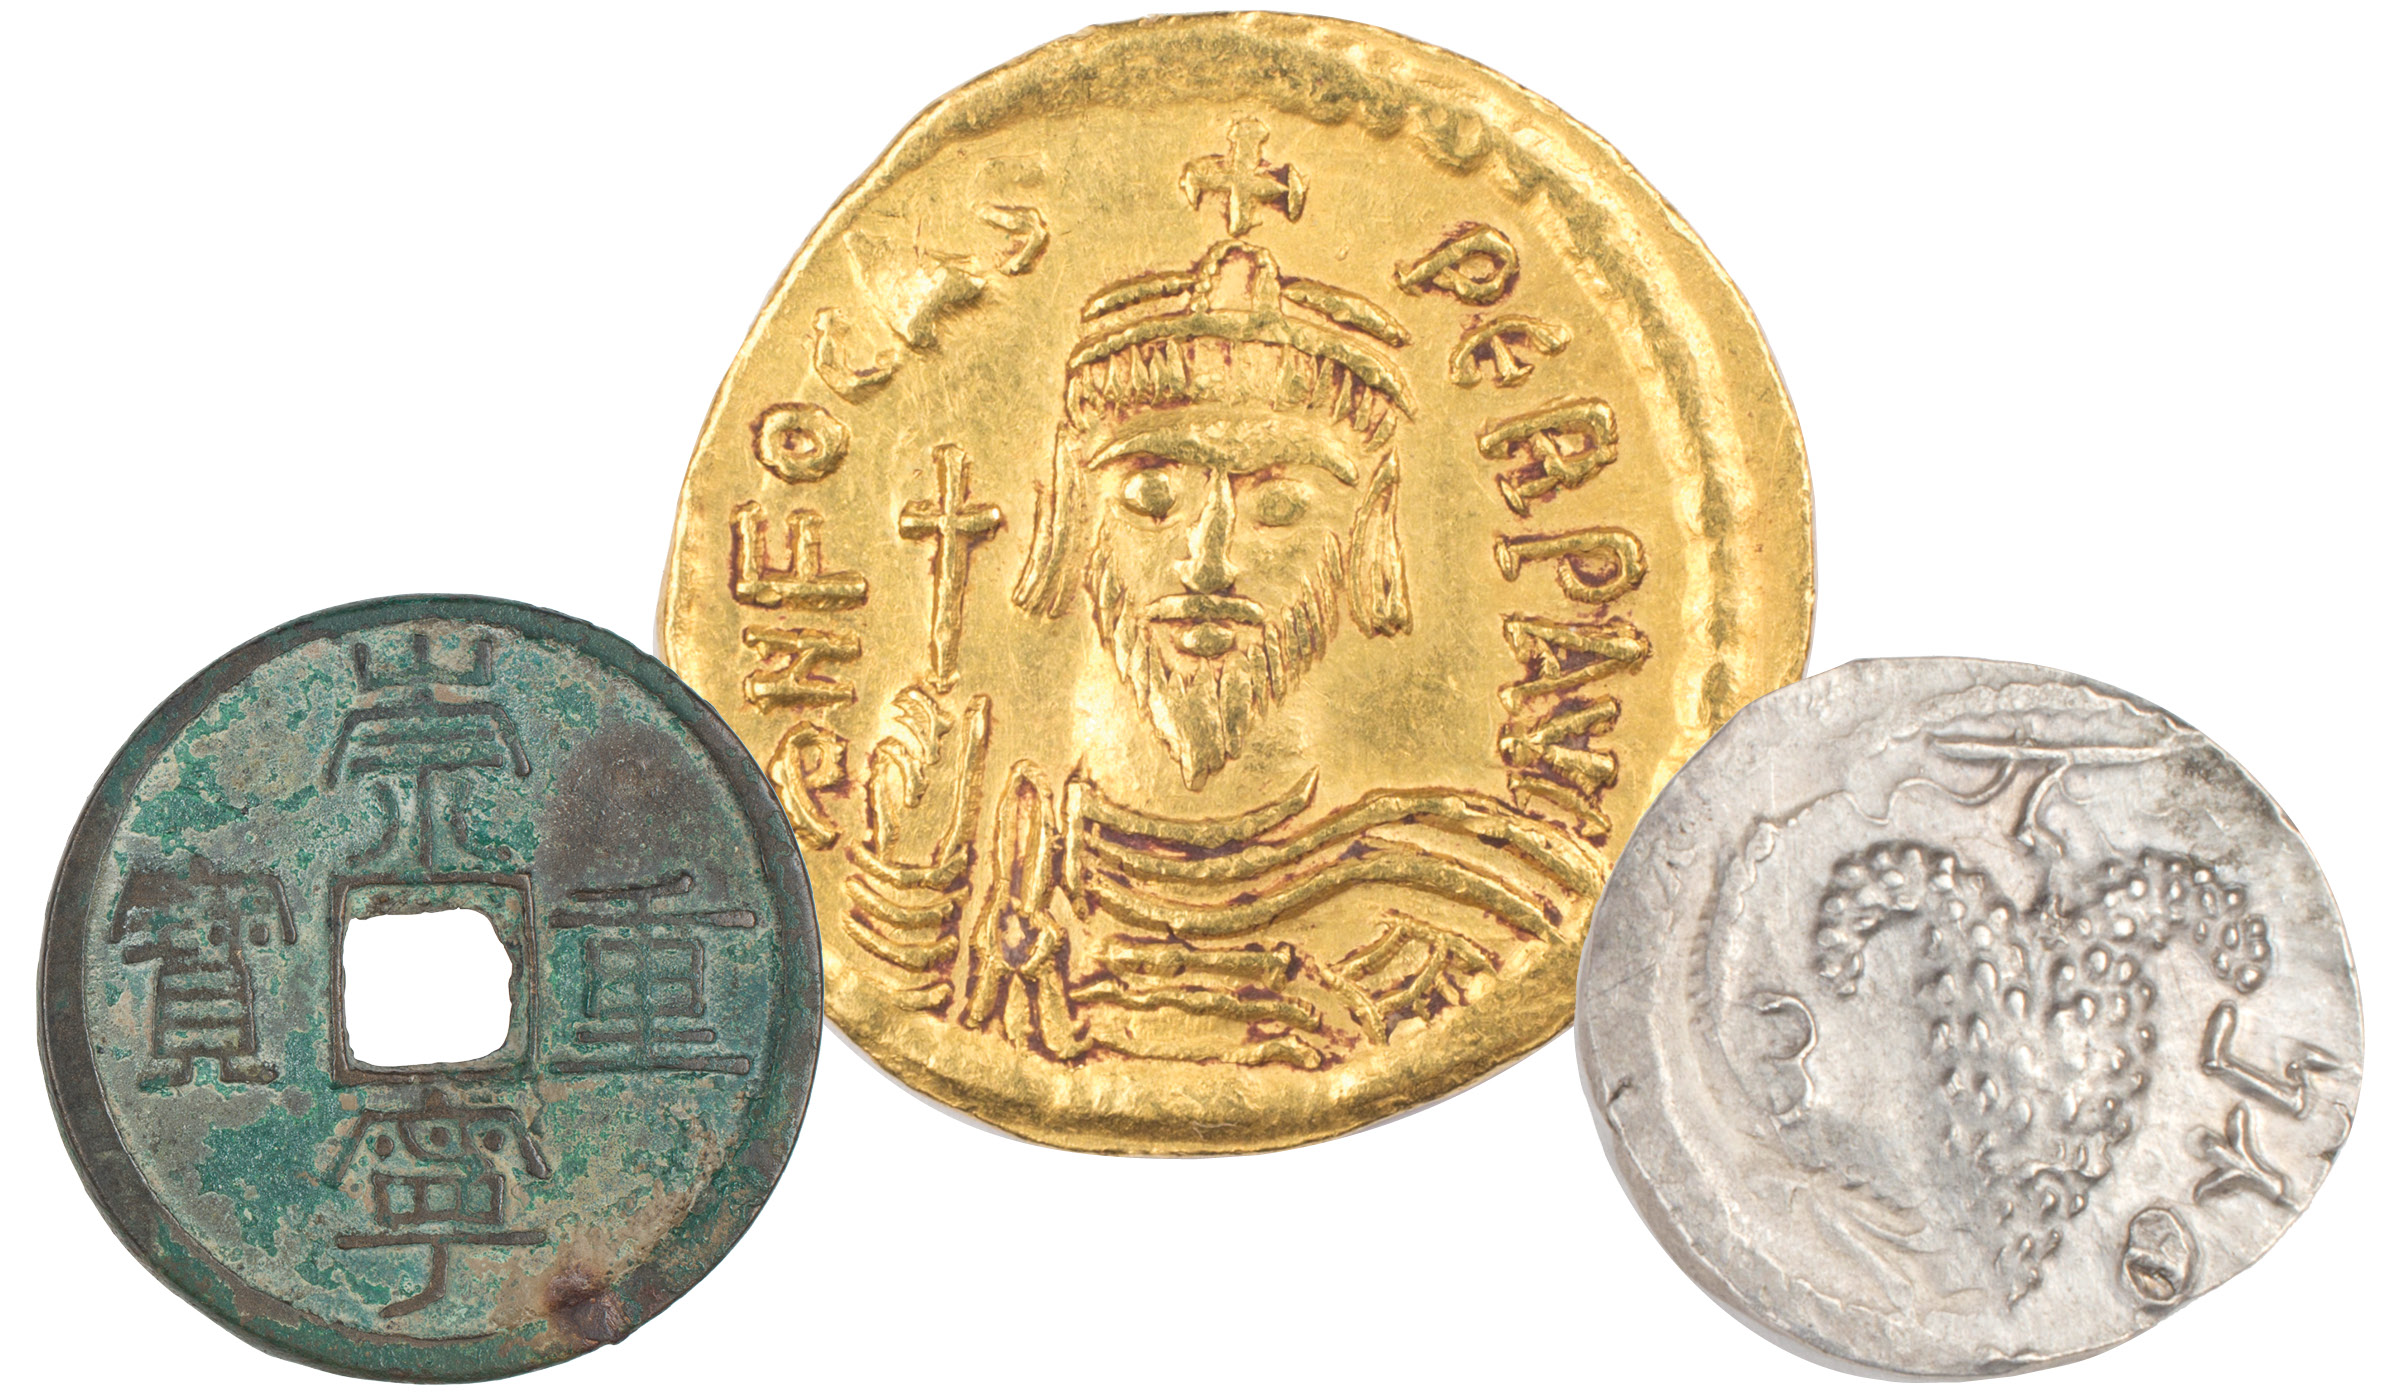 3 ancient coins. Left: Coin of China of the Northern Song Dynasty, 1102-1106 CE. Center: Solidus of the Byzantine Empire, 602-610 CE. Right: Zusim of Judaea, 134-135 CE.